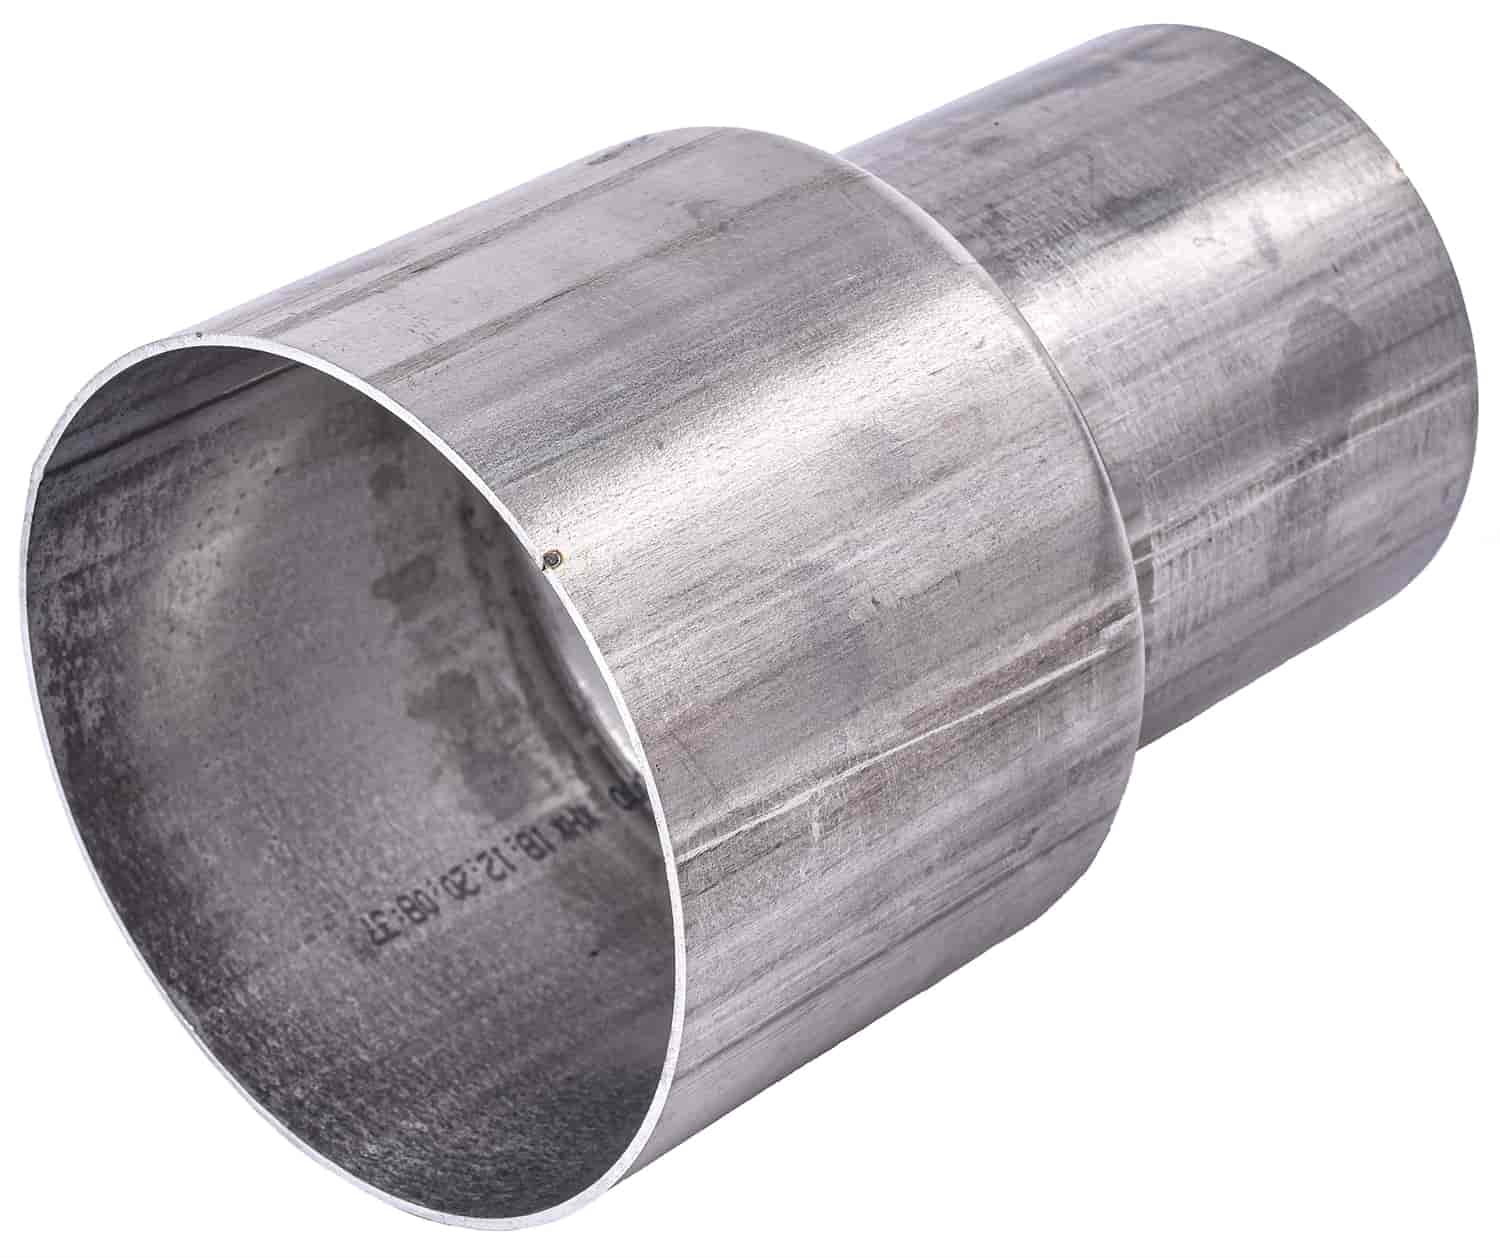 Slip-On Exhaust Pipe Adapter [3 in. ID to 4 in. OD]